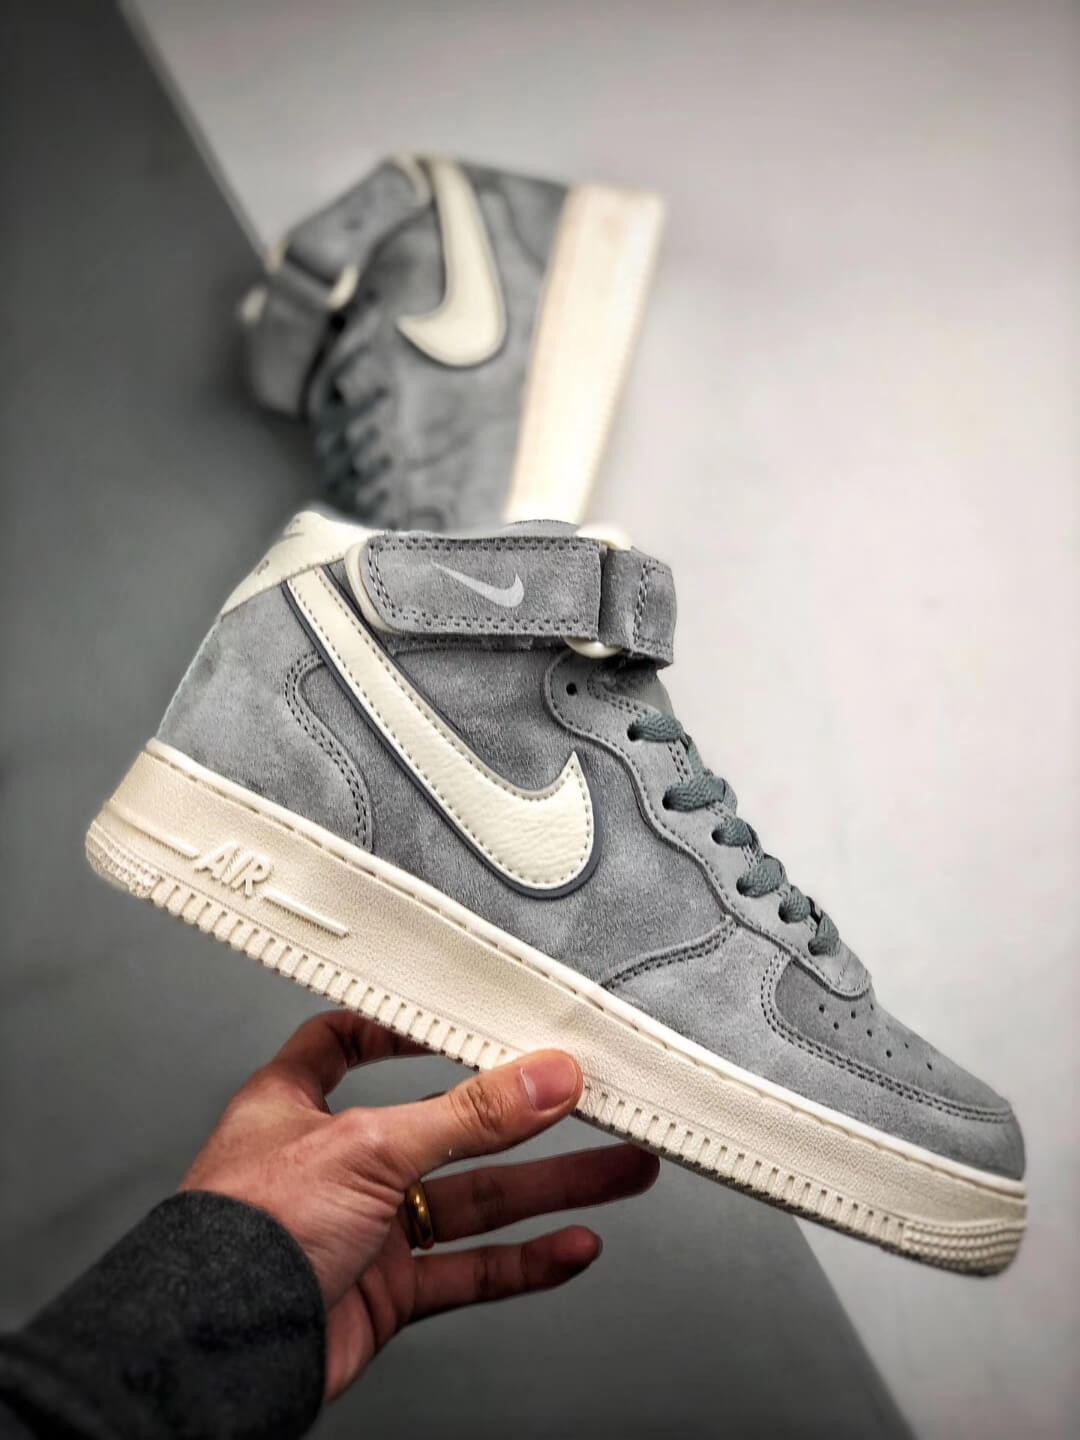 nike air force 1 mid 07 suede